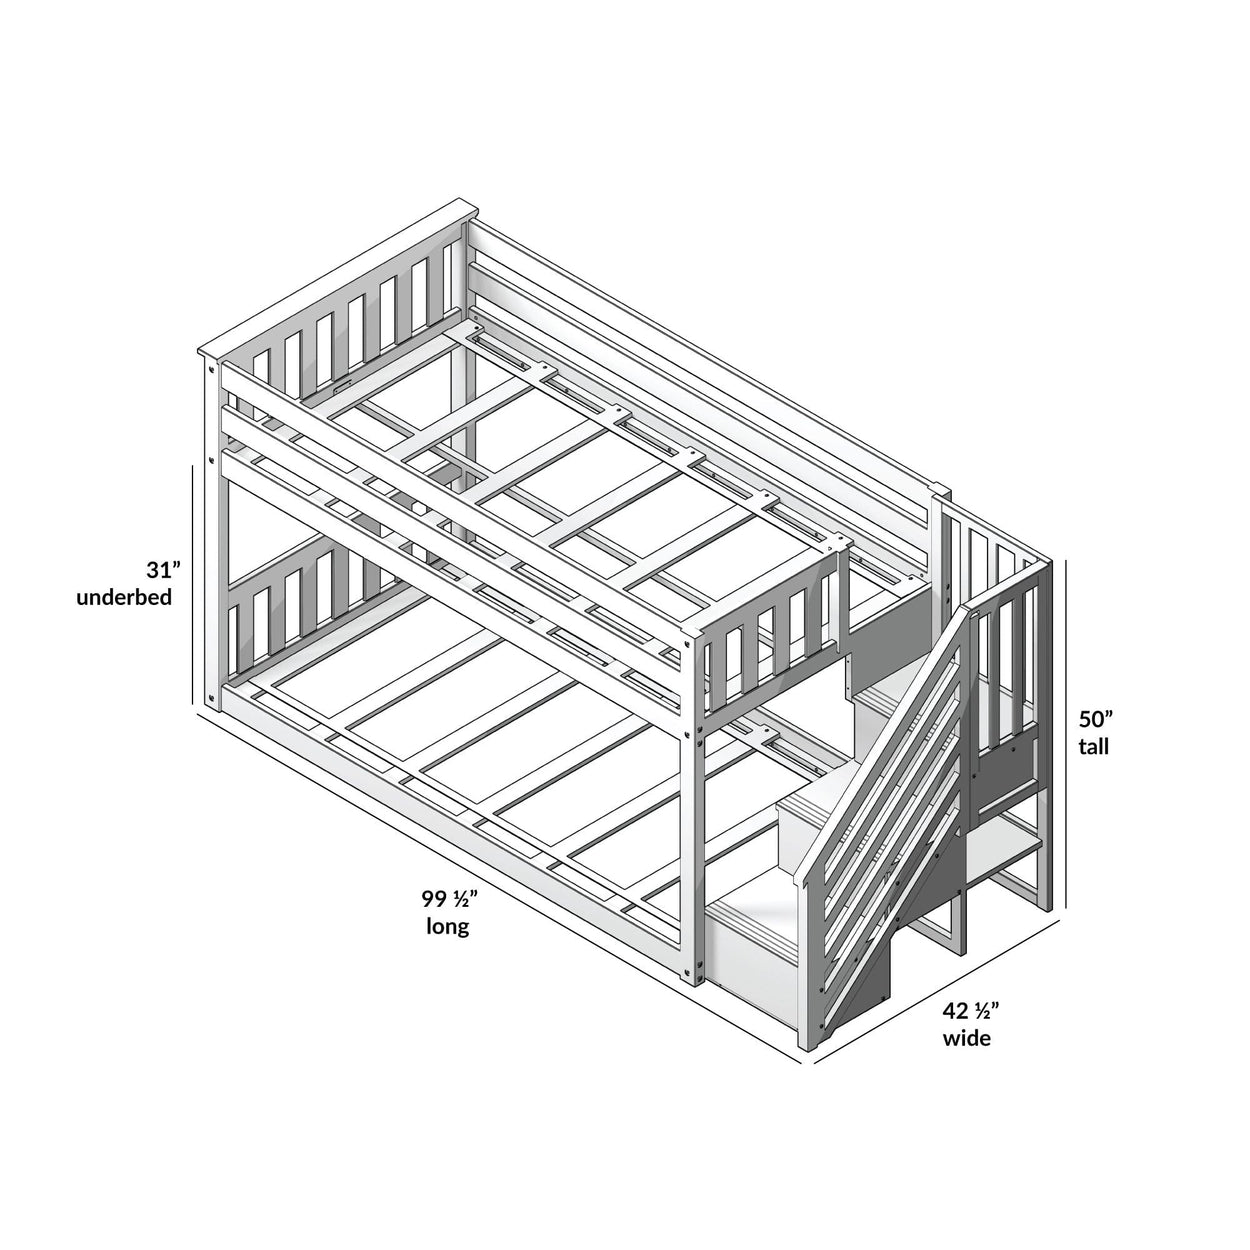 185220121309 : Bunk Beds Low Bunk with Stairs and Three Guard Rails, Grey